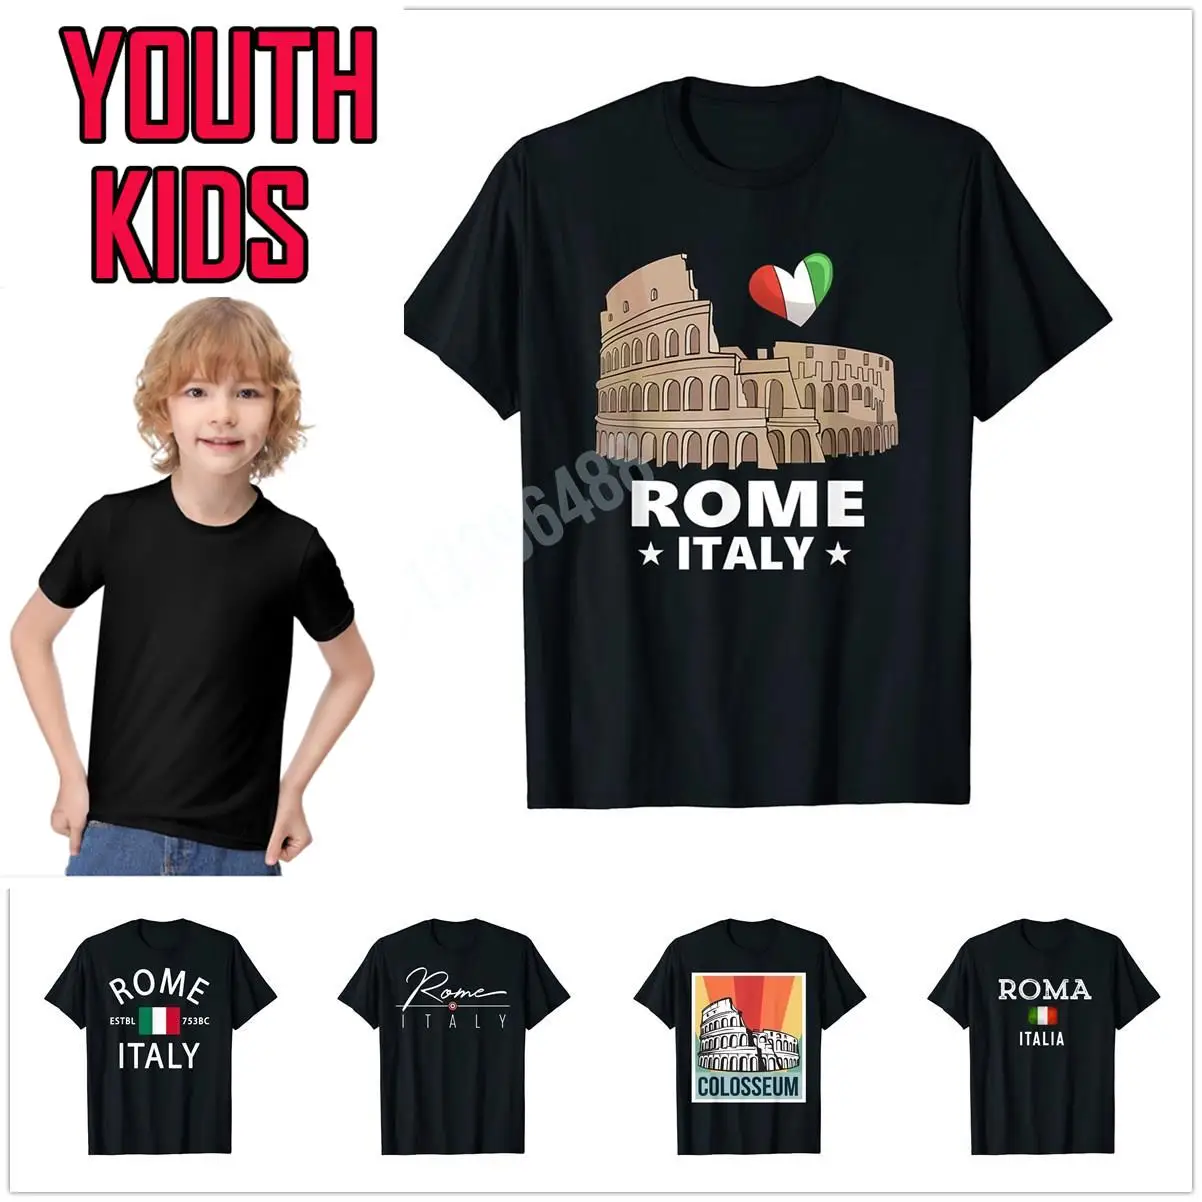 

100% Cotton Youth Kids Rome Roma Italy Italian Coliseum Vintage T-Shirt Map For Children T Shirt Tops Boy Girl Tee